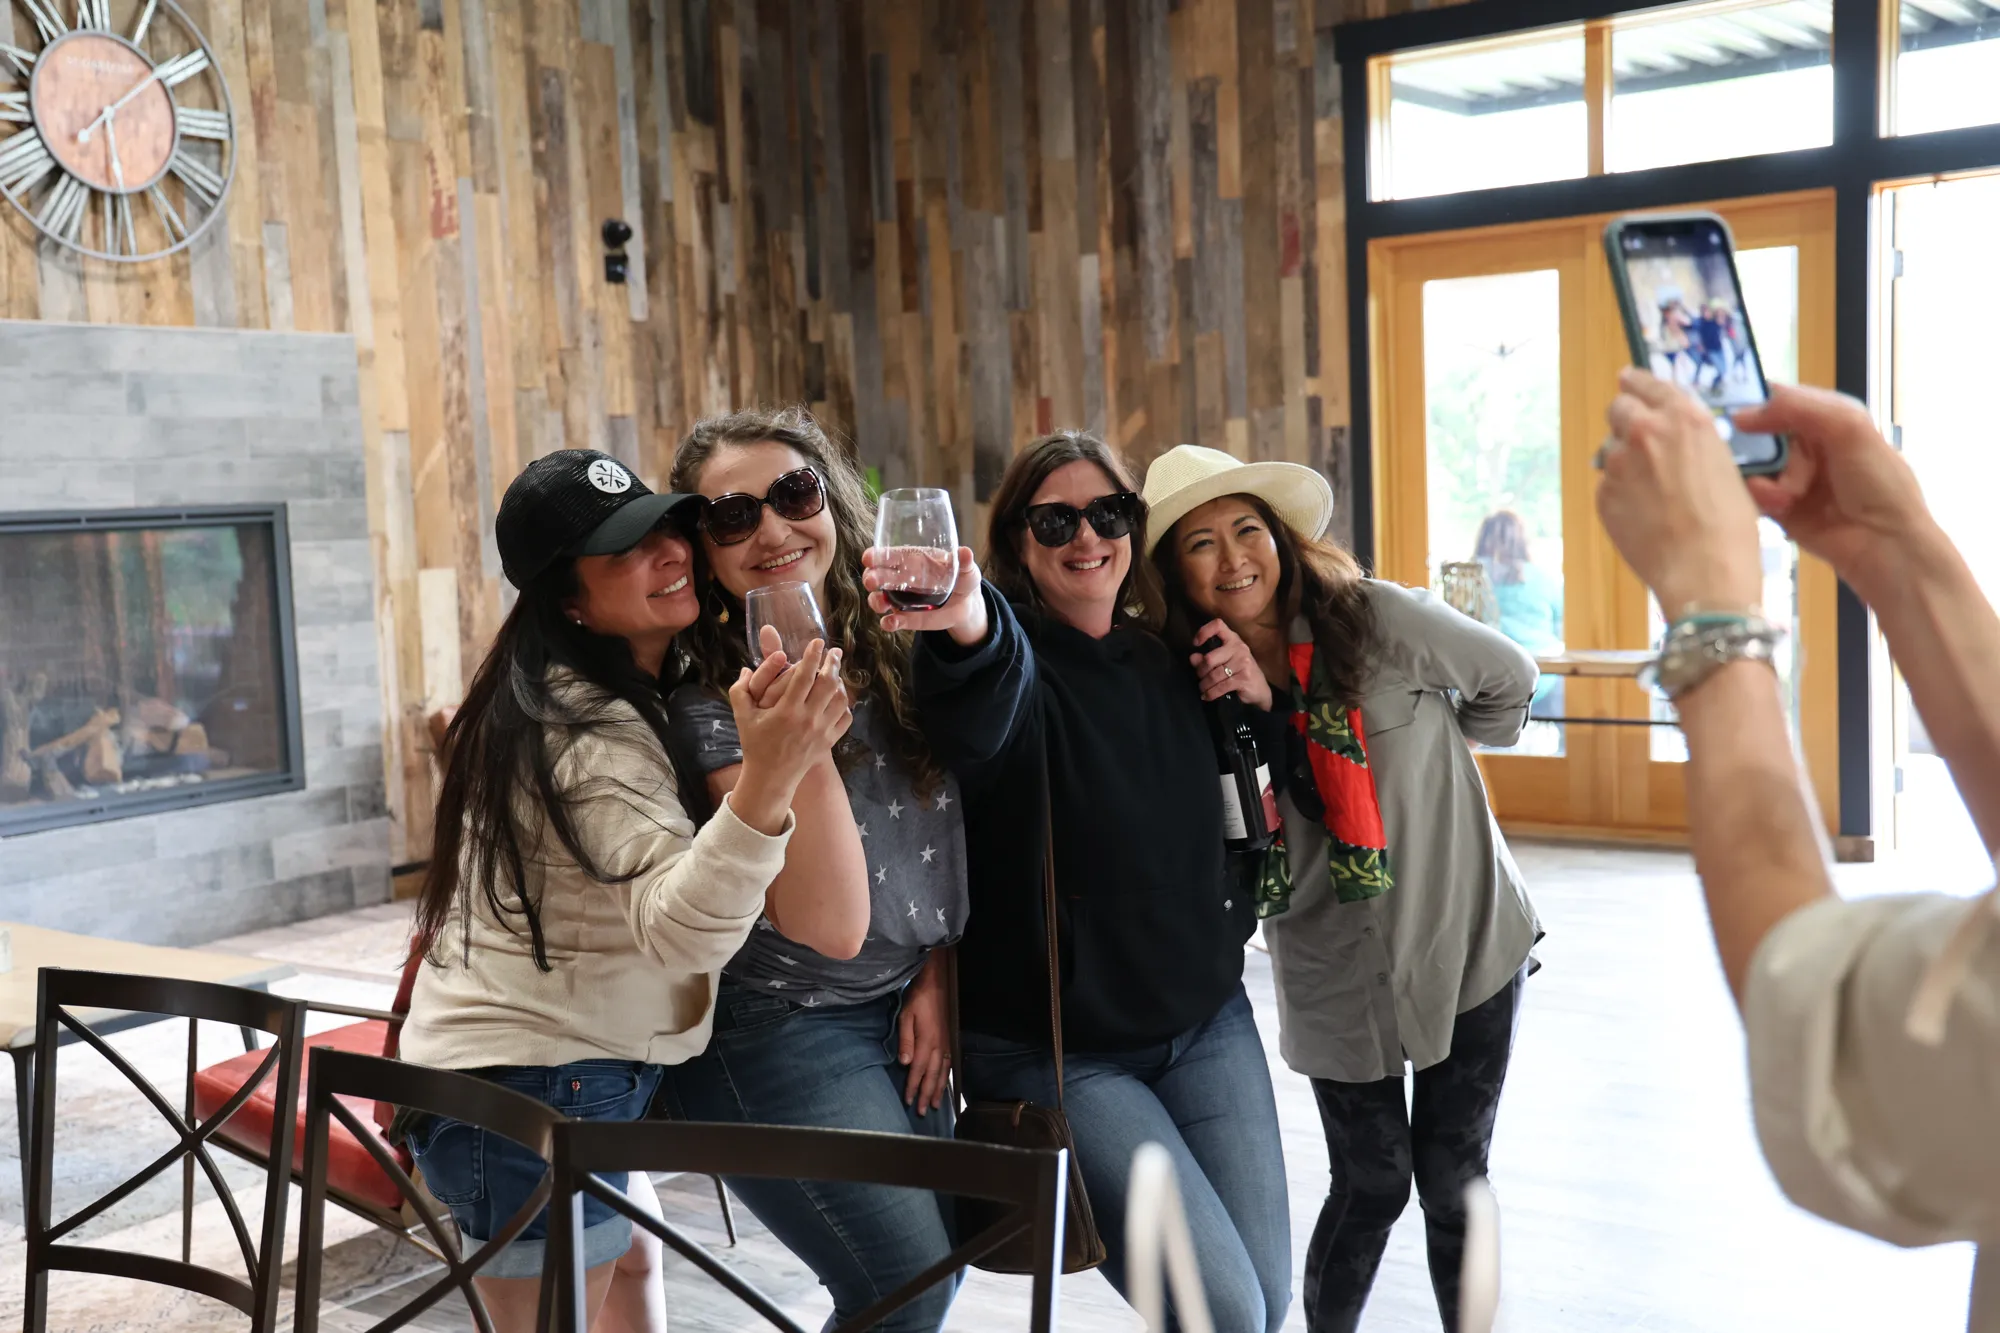 Woman taking iphone photo of four women wine tasting inside tasting room and lounge, indoor event venue, Santa Rosa, CA, Sugarloaf Wine Co.